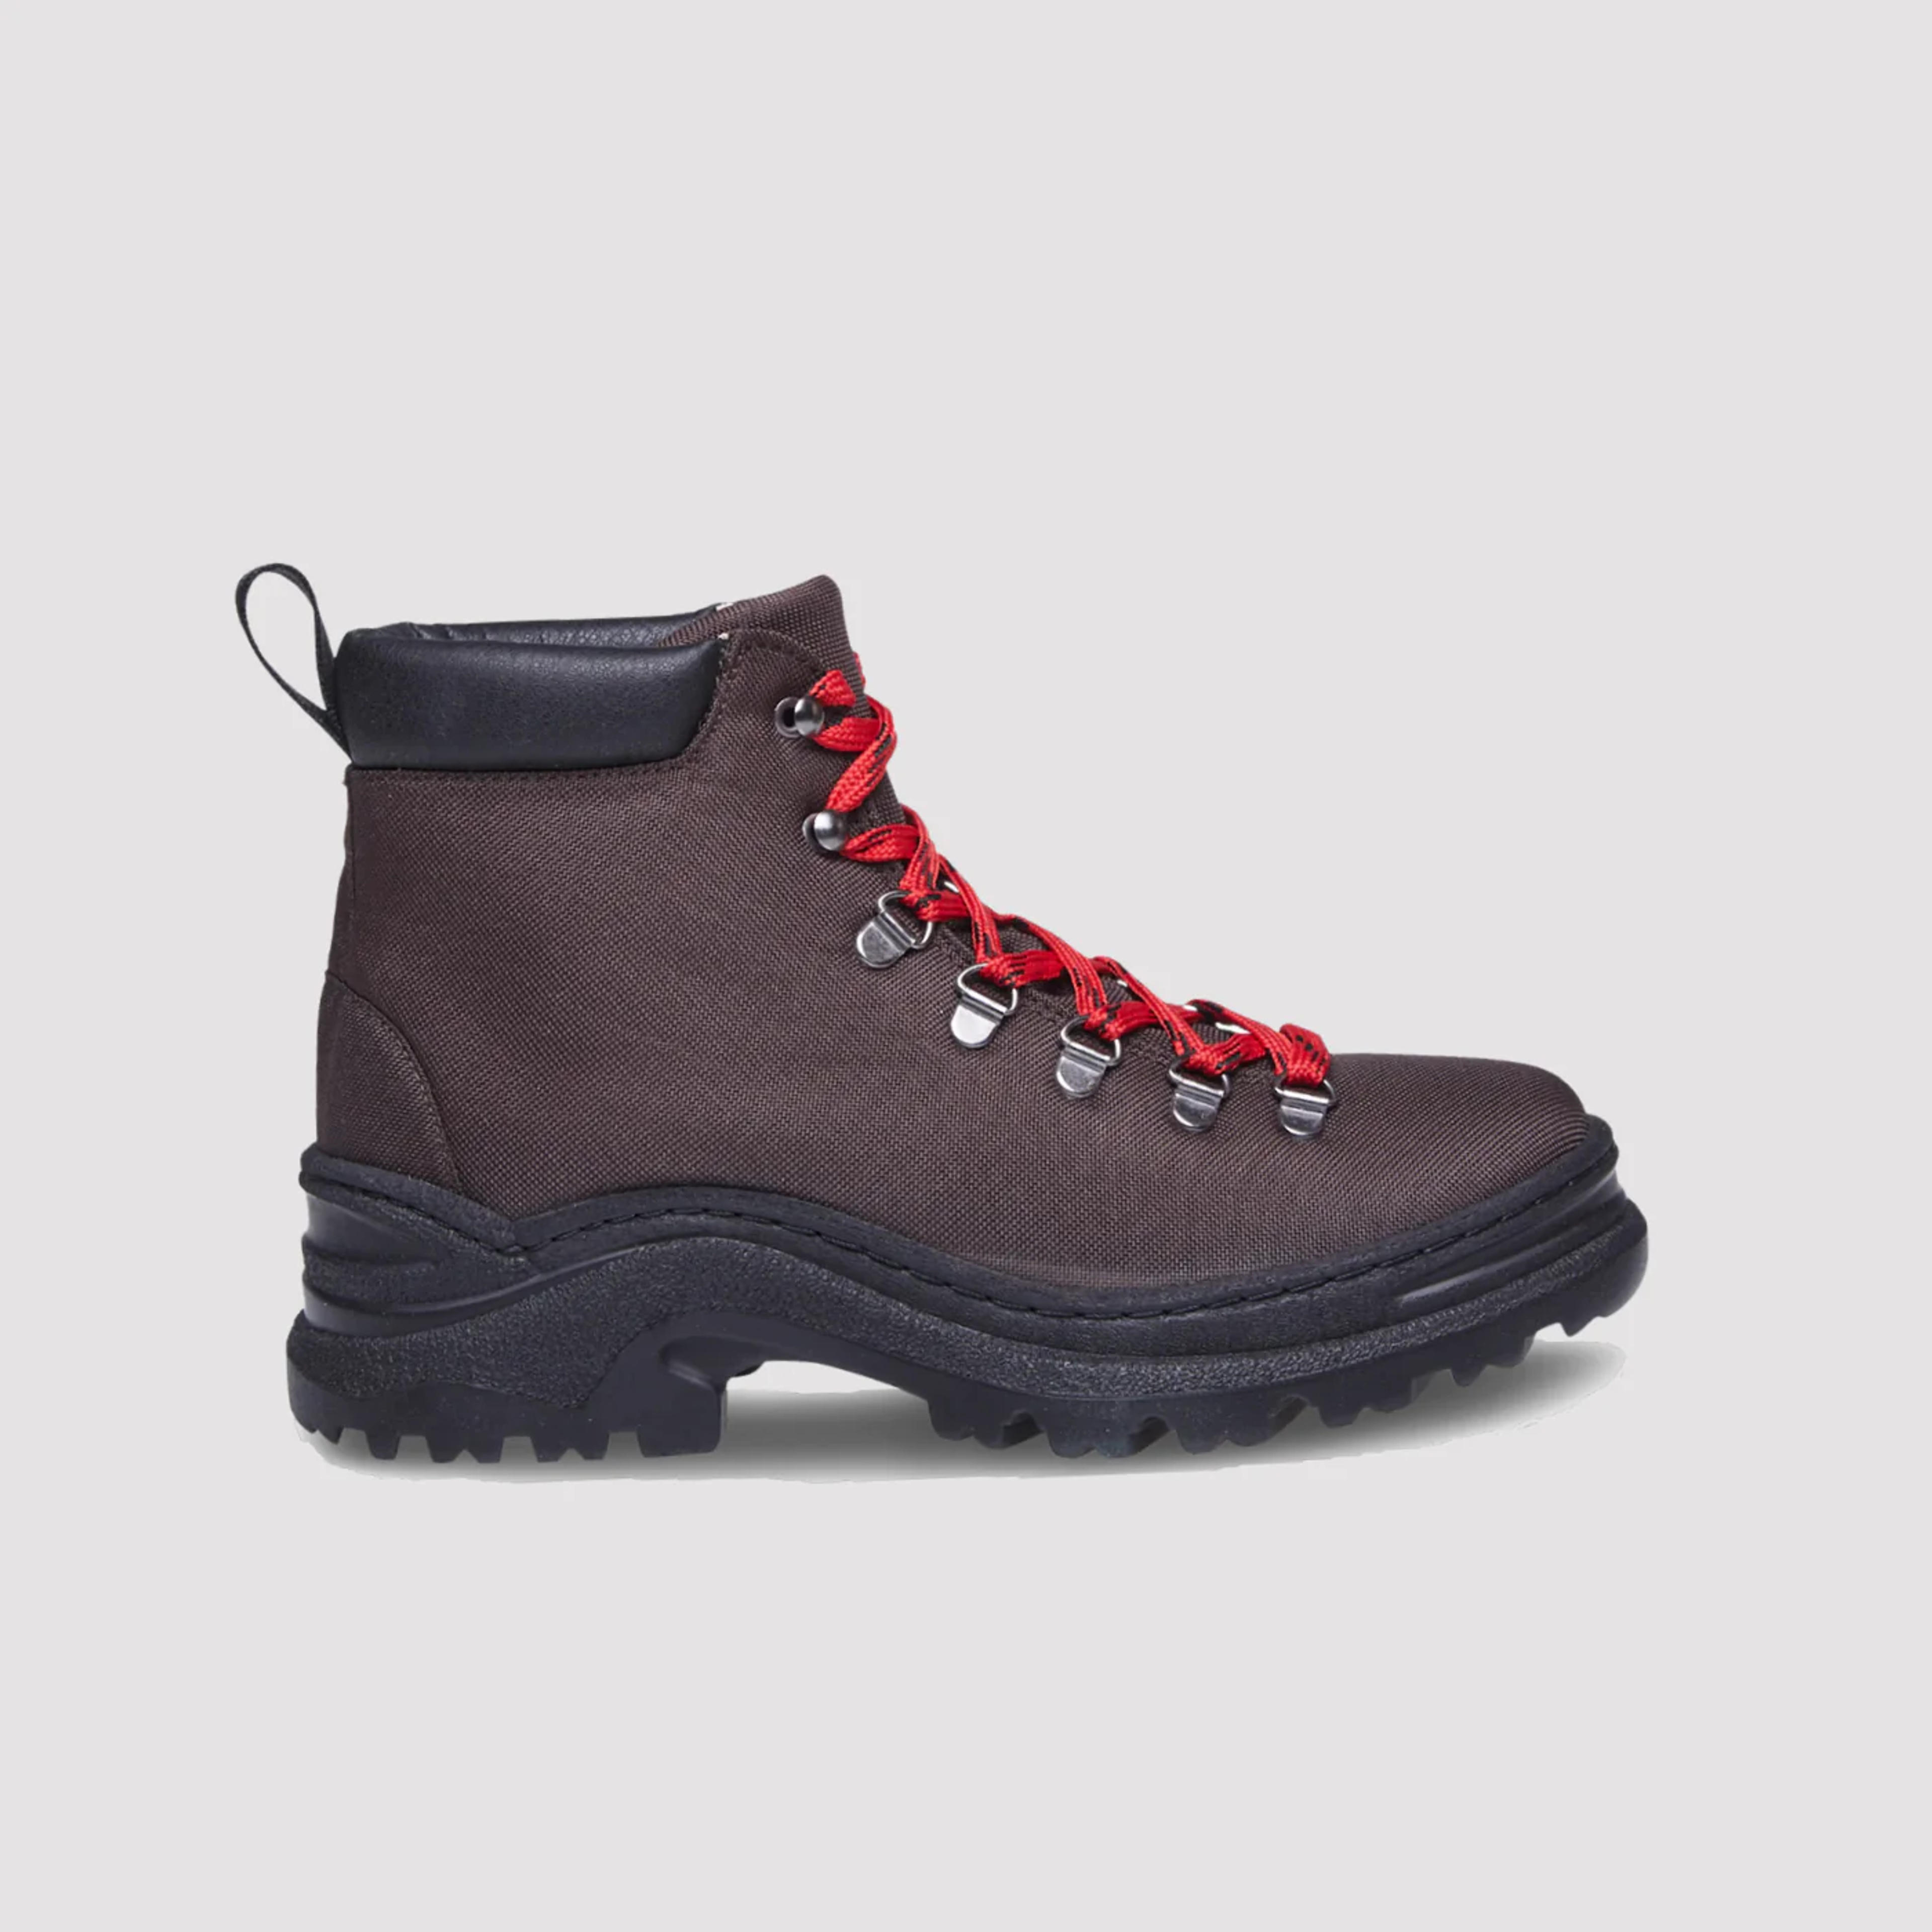 The Weekend Boot New Classic Brown